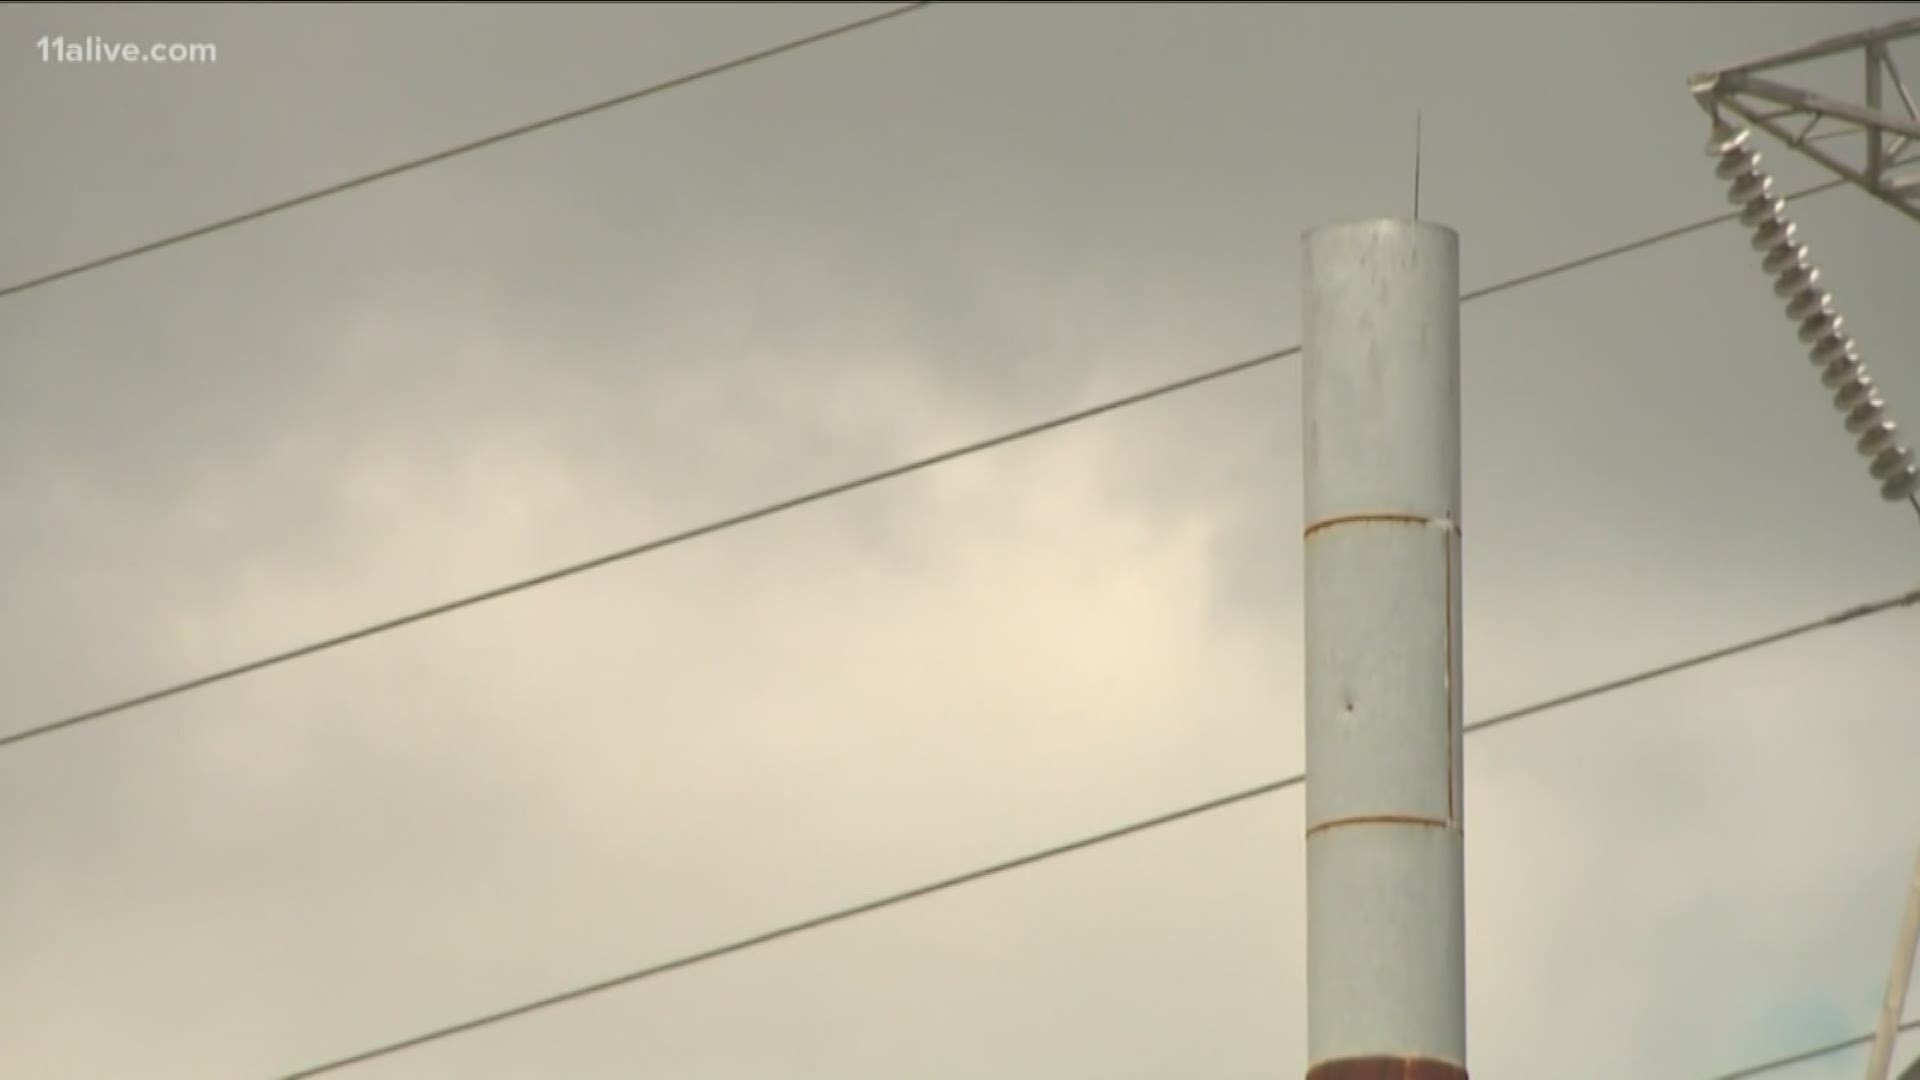 The city of Atlanta said Monday they were entering into an agreement with Cobb County and the city of Smyrna to test air in parts of the city near a plant where emissions of a cancer-causing compound has been reported.